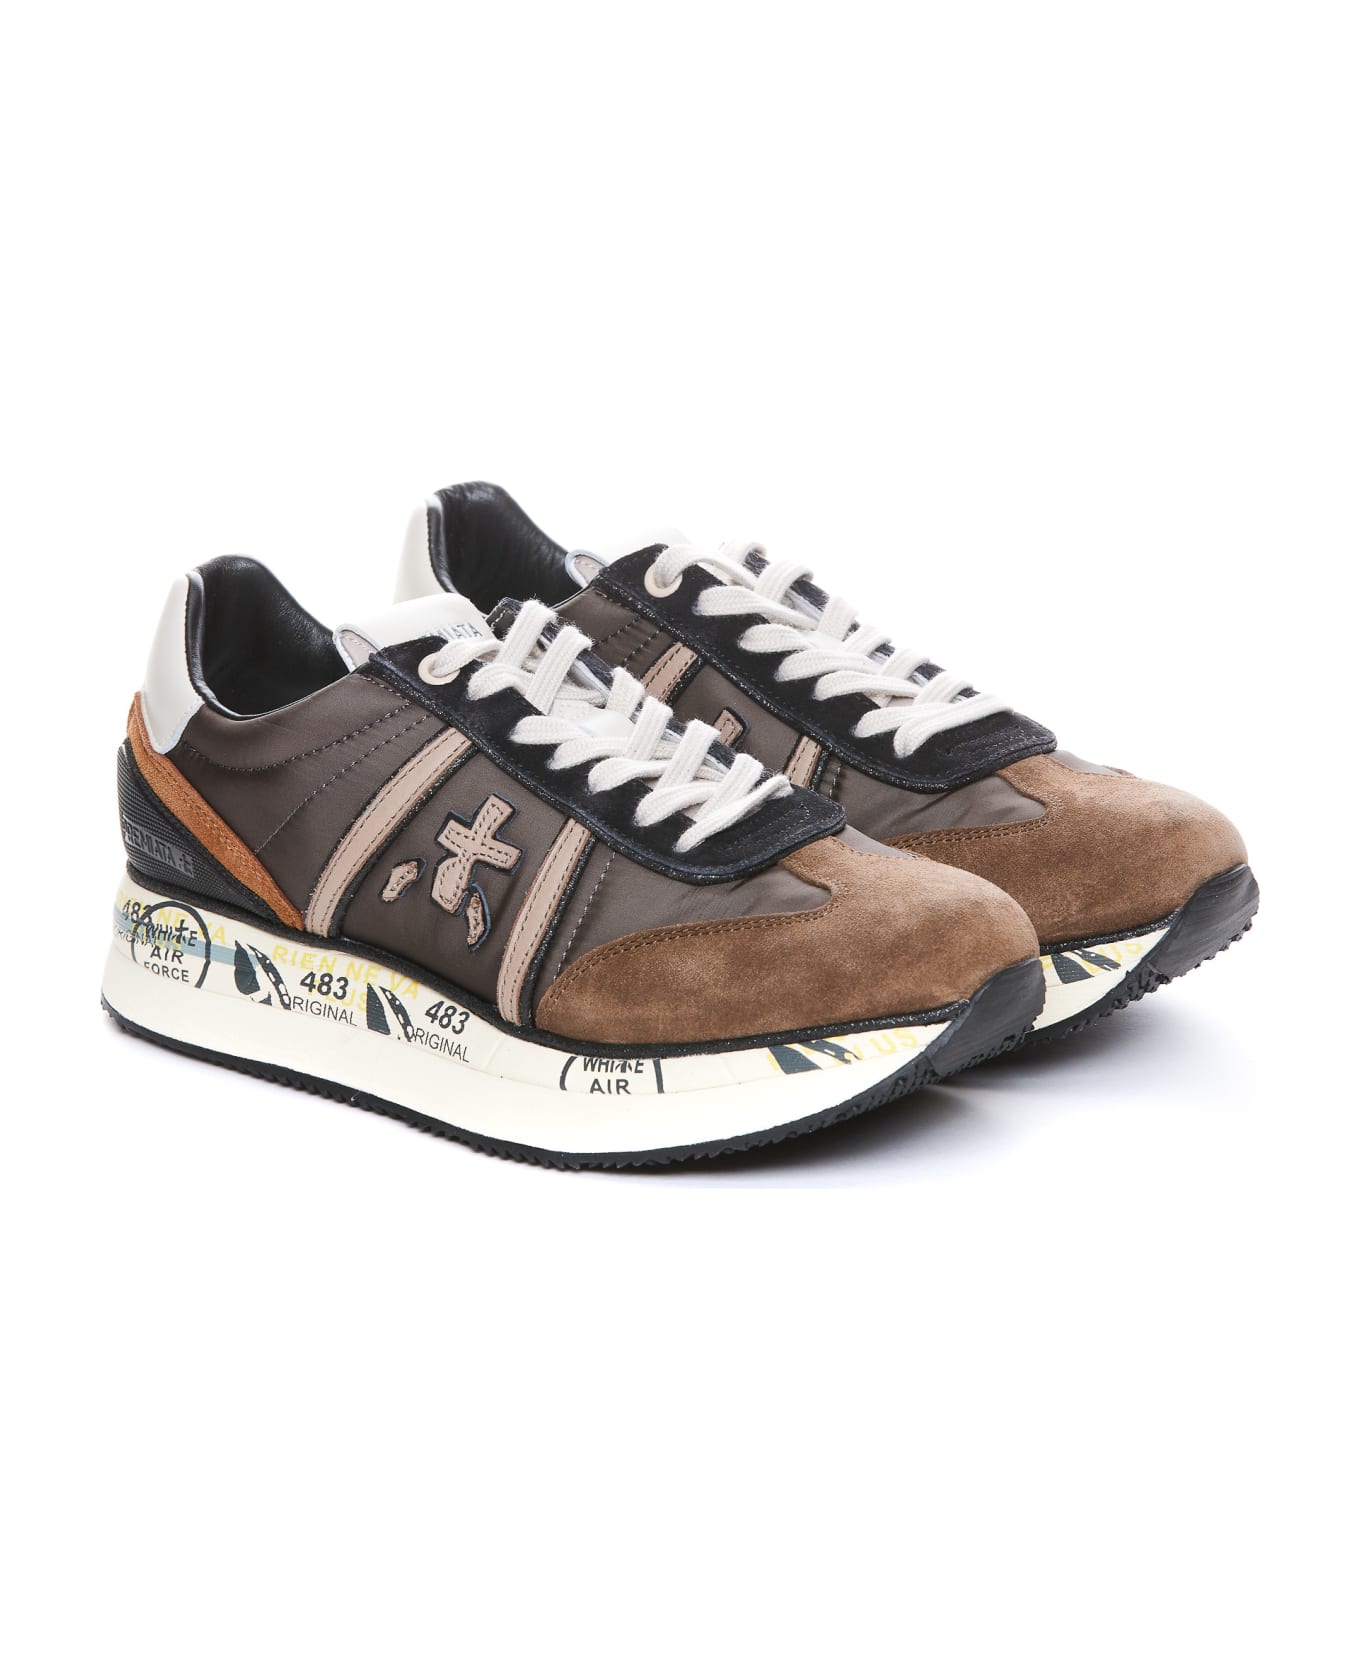 Premiata Conny Sneakers In Brown Suede And Fabric - Grigio